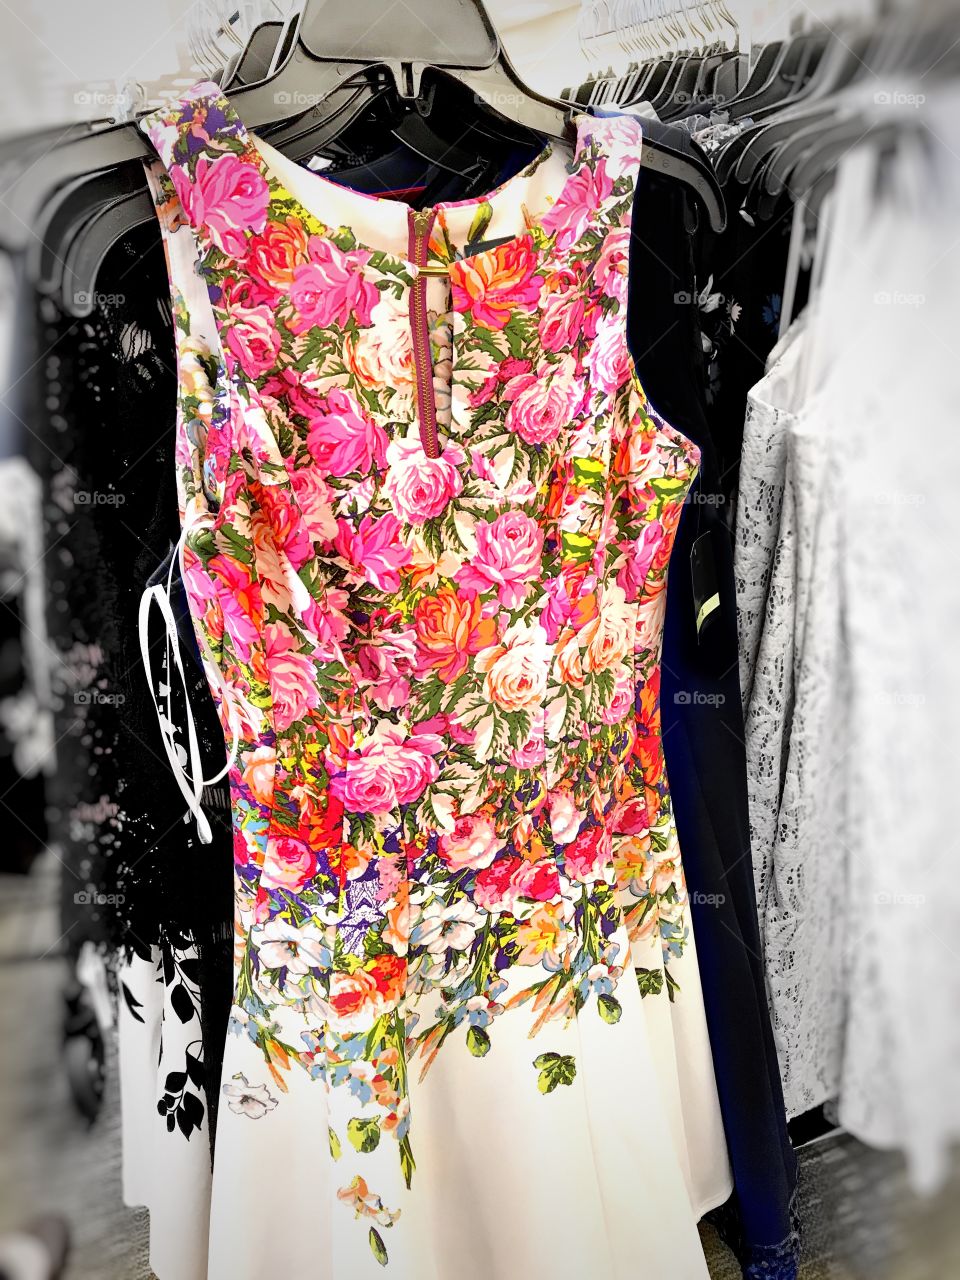 Colorful sleeveless Dress with red, pink, yellow flowers